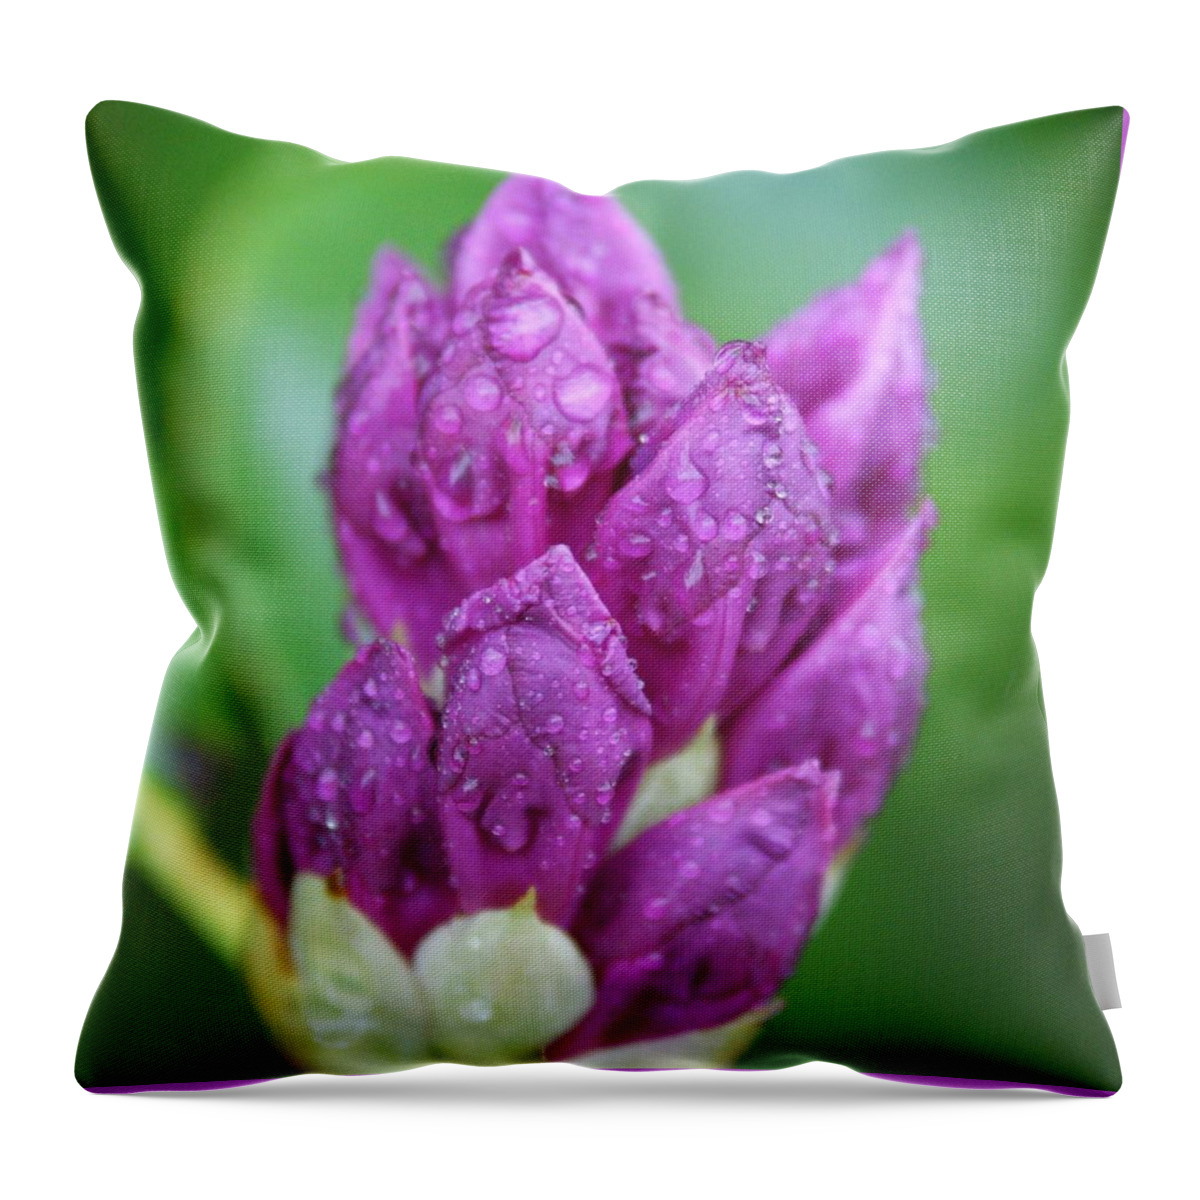 Flower Throw Pillow featuring the photograph Bedazzled by Alex Grichenko